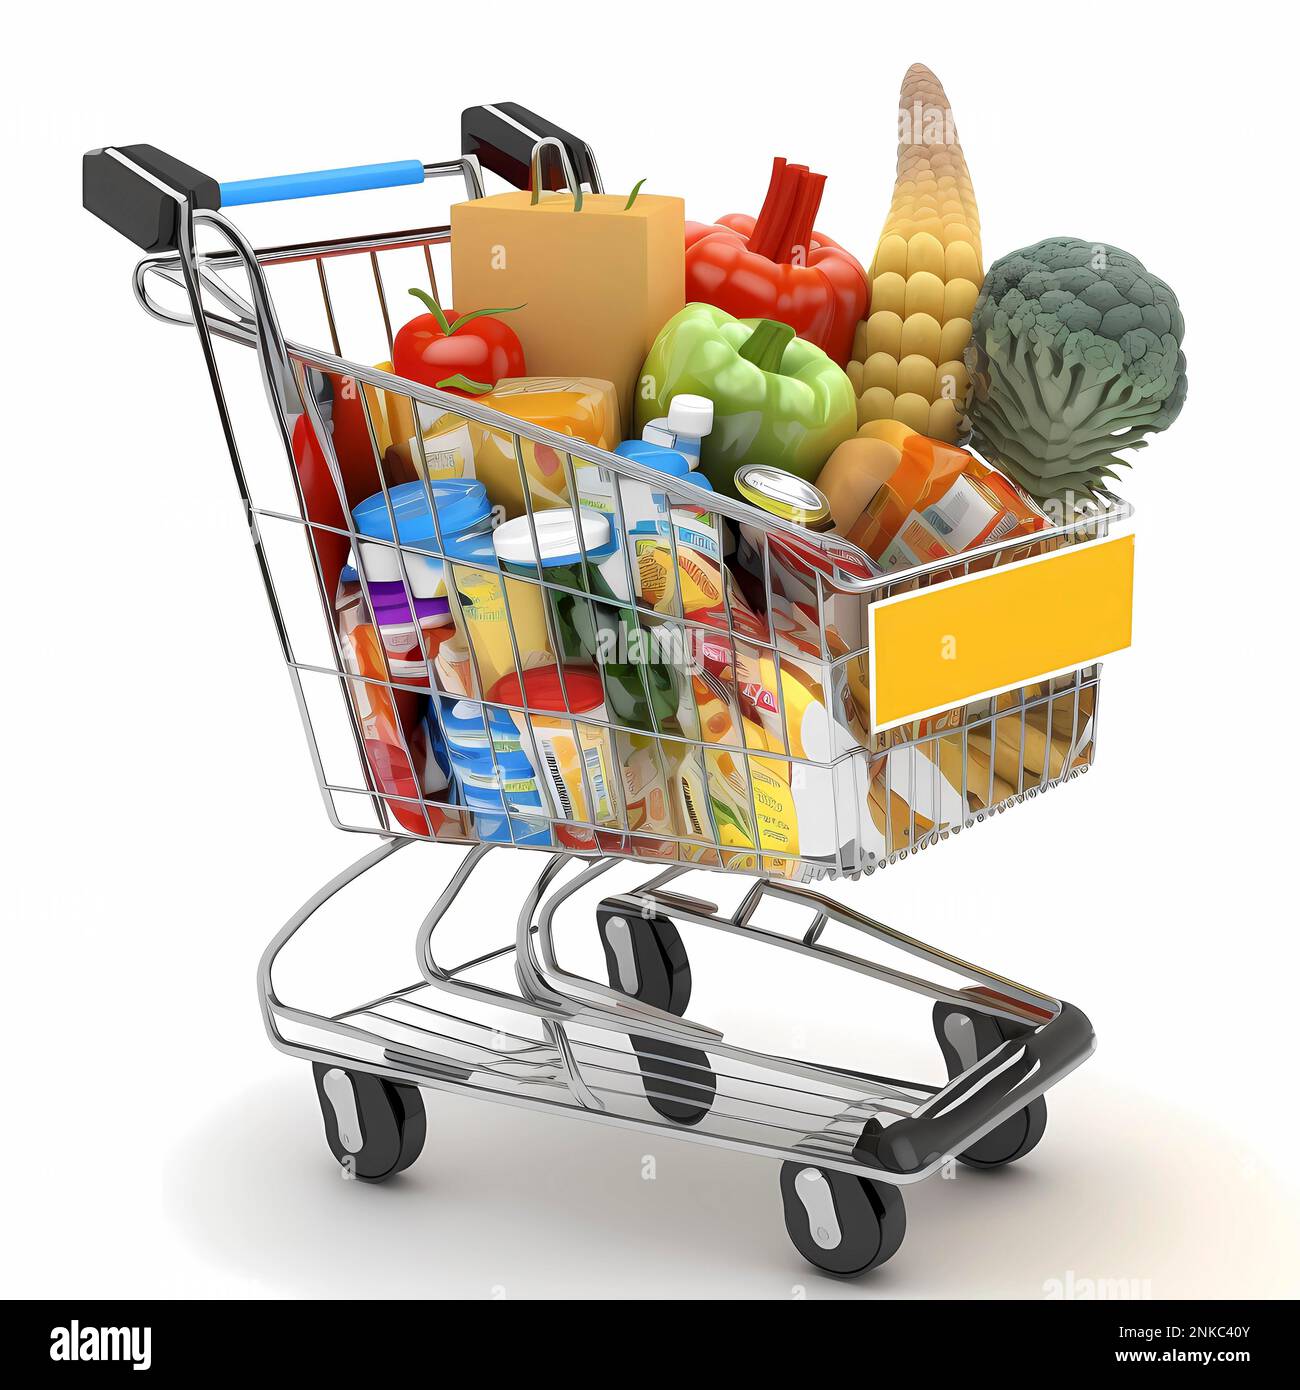 Einkaufstuete, Shopping cart for groceries from which the groceries swell against a white background Stock Photo